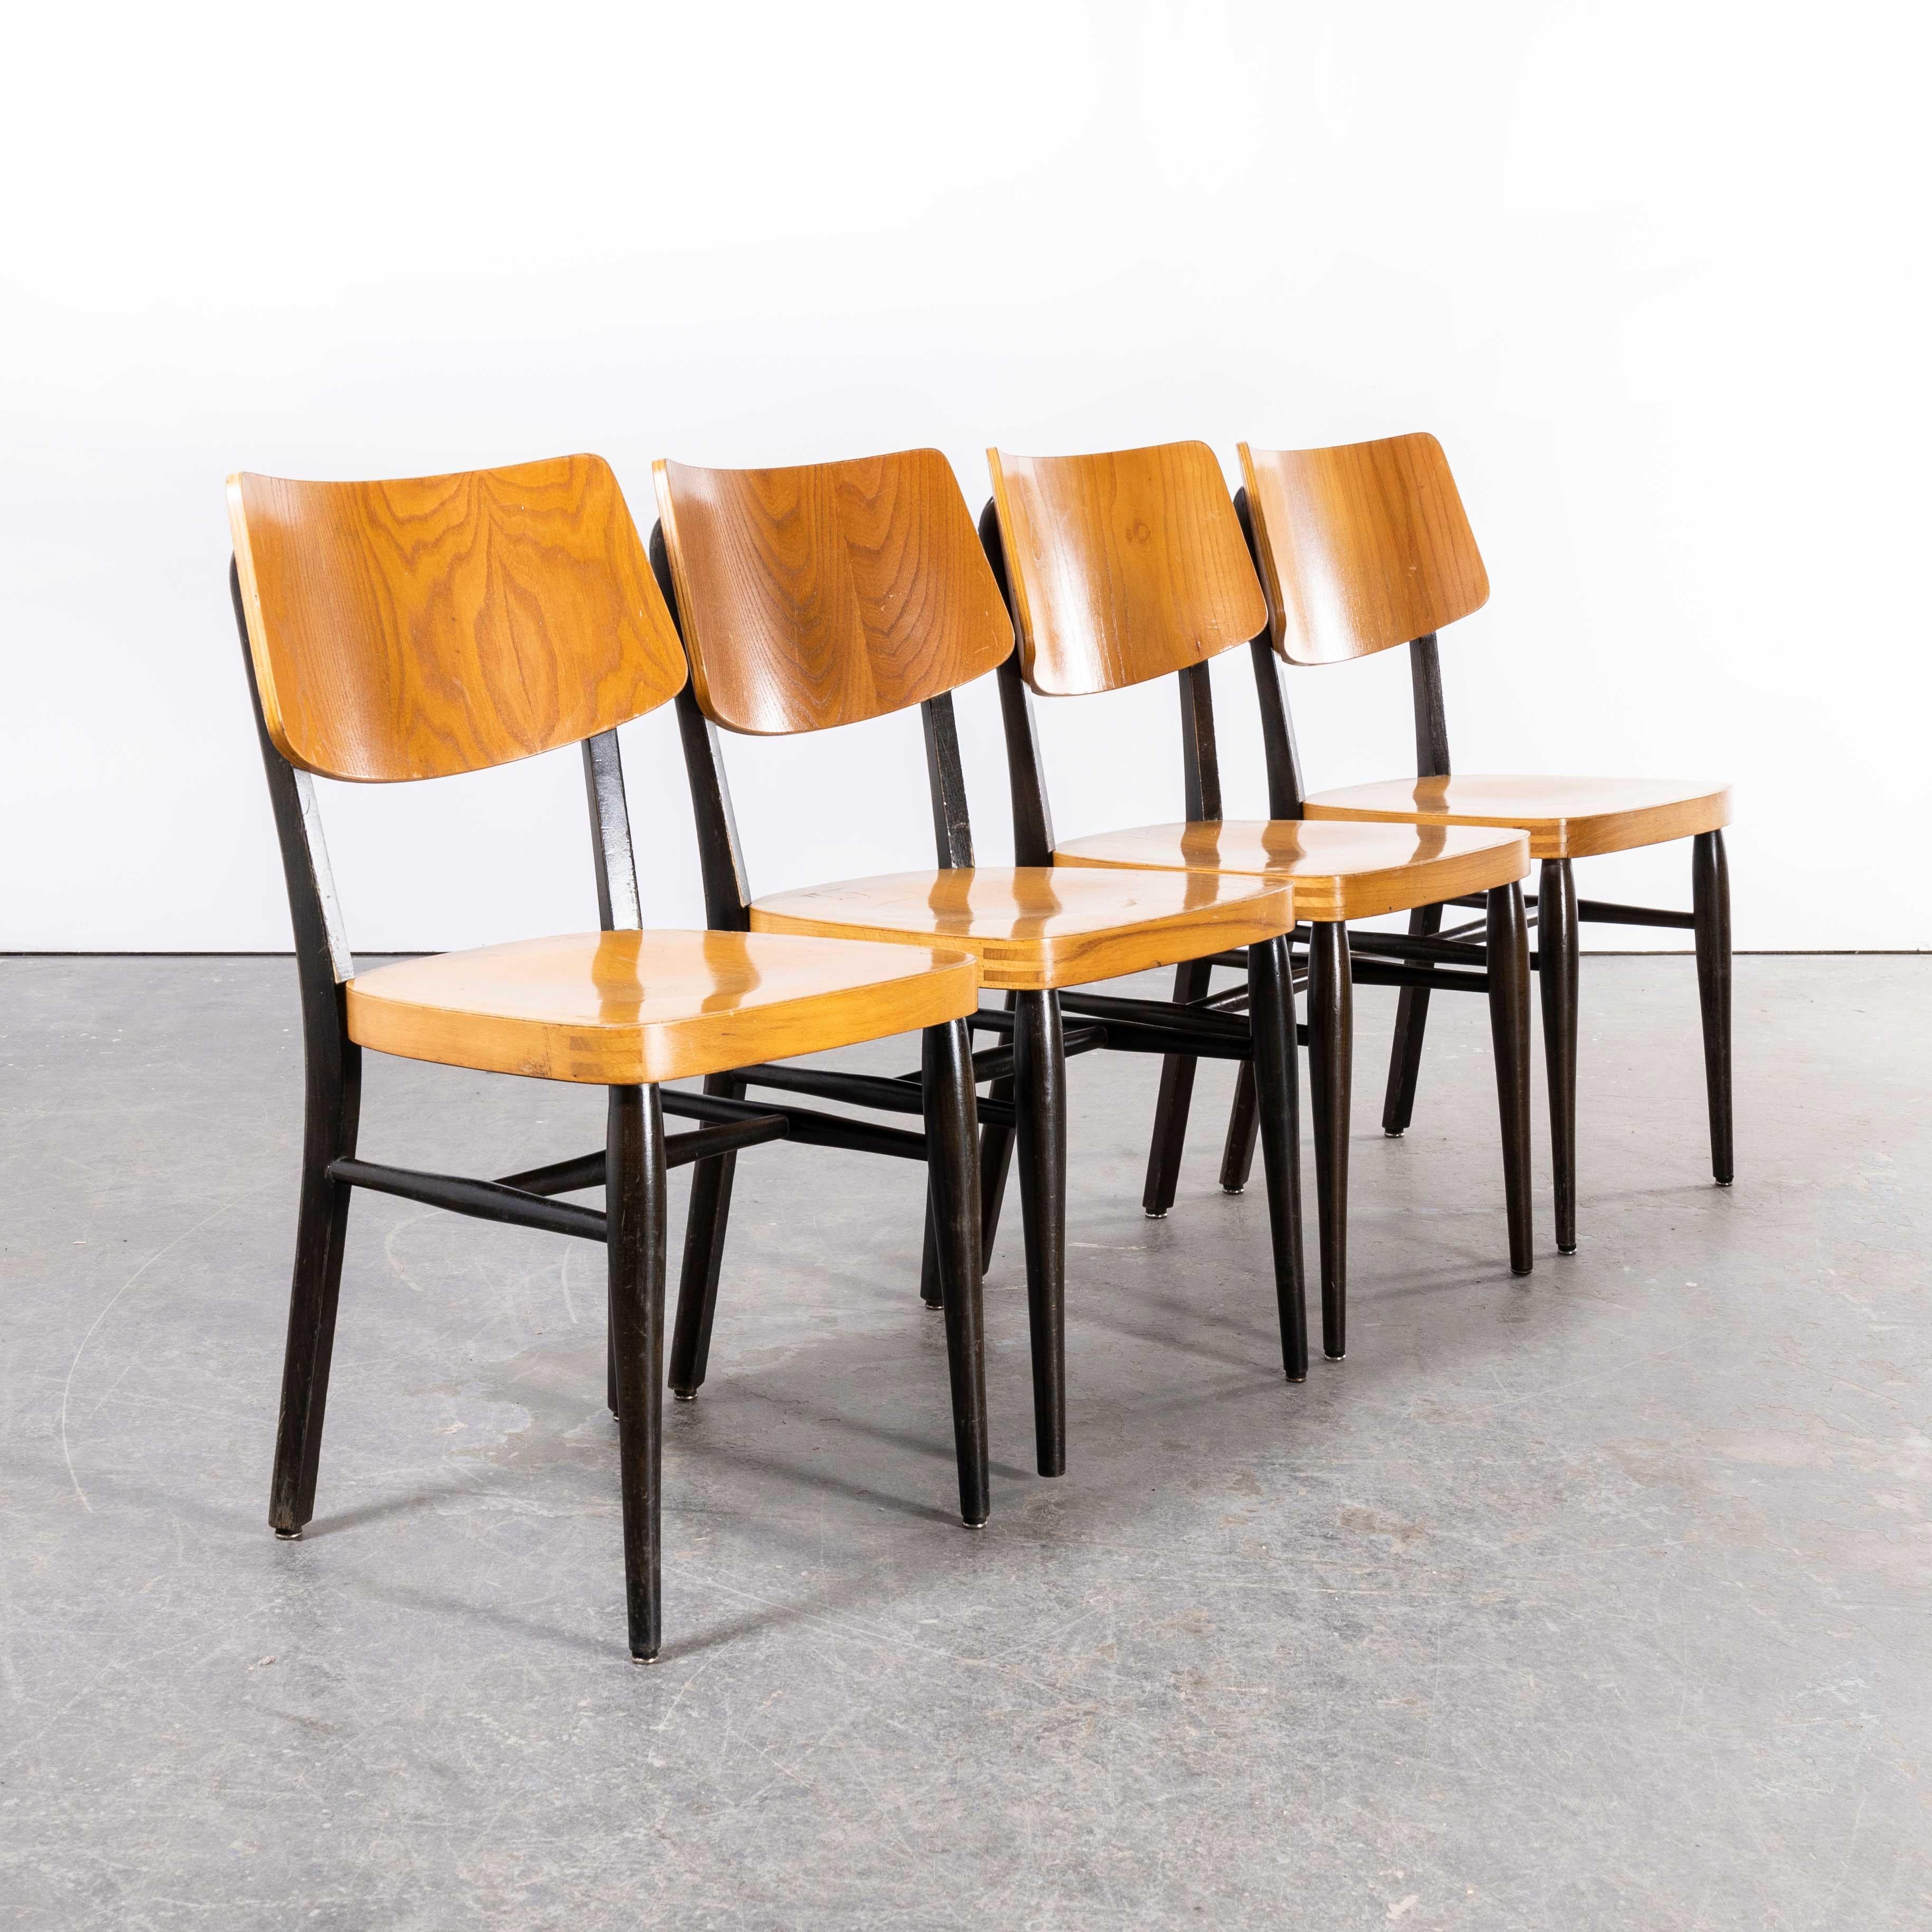 1970s two tone saddle back dining chair – set of four
1970s two tone saddle back dining chair – set of four. Sourced in central Germany we loved these chairs for their wide sculptural contemporary backs and two tone ebonized frames and oak seats